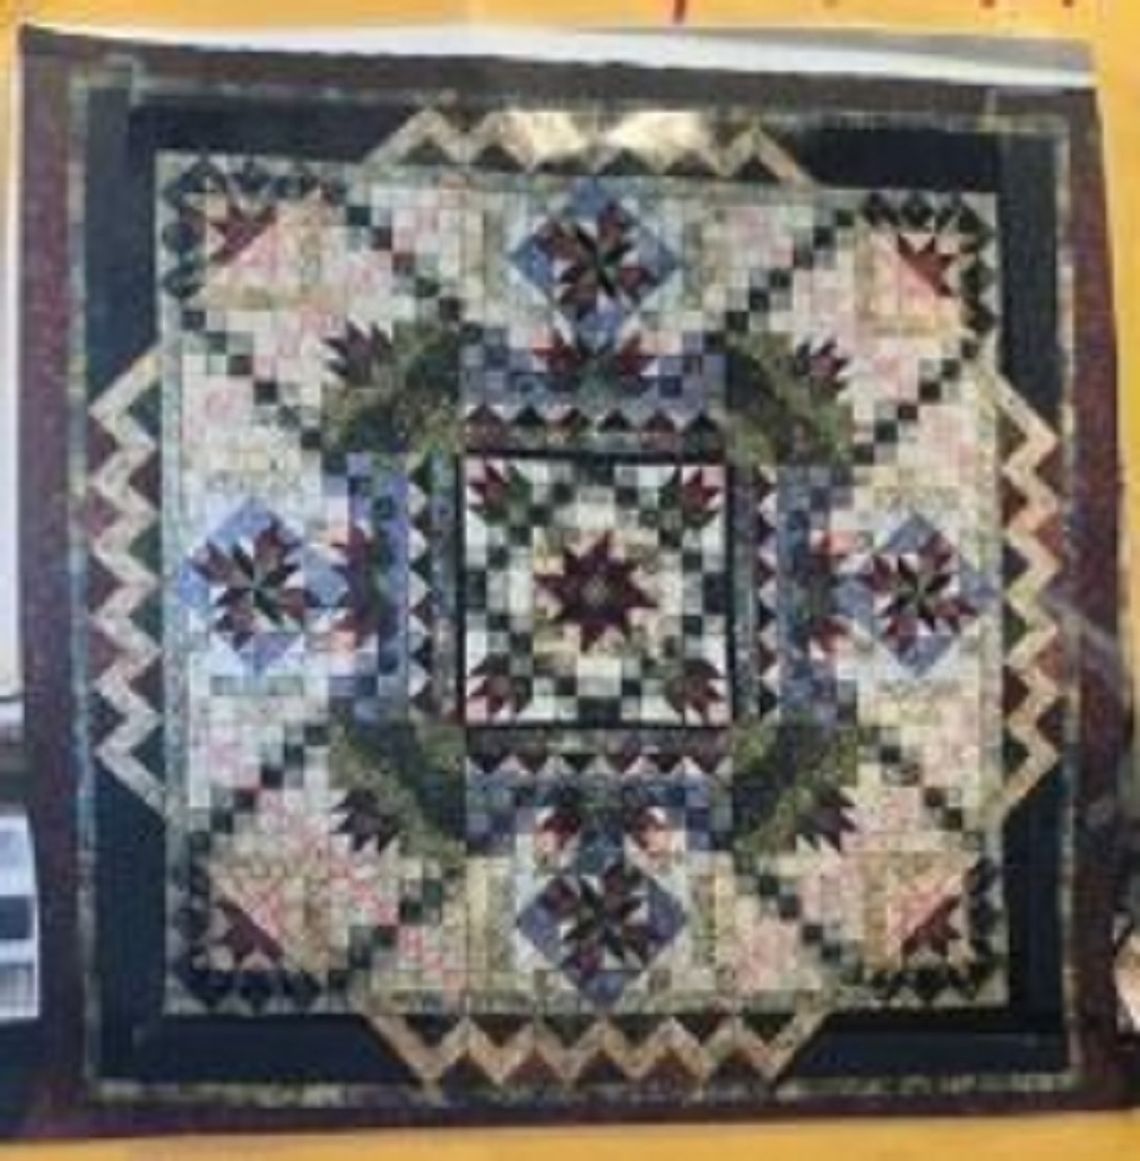 Quilt on Display at the Home and Garden Show this Weekend